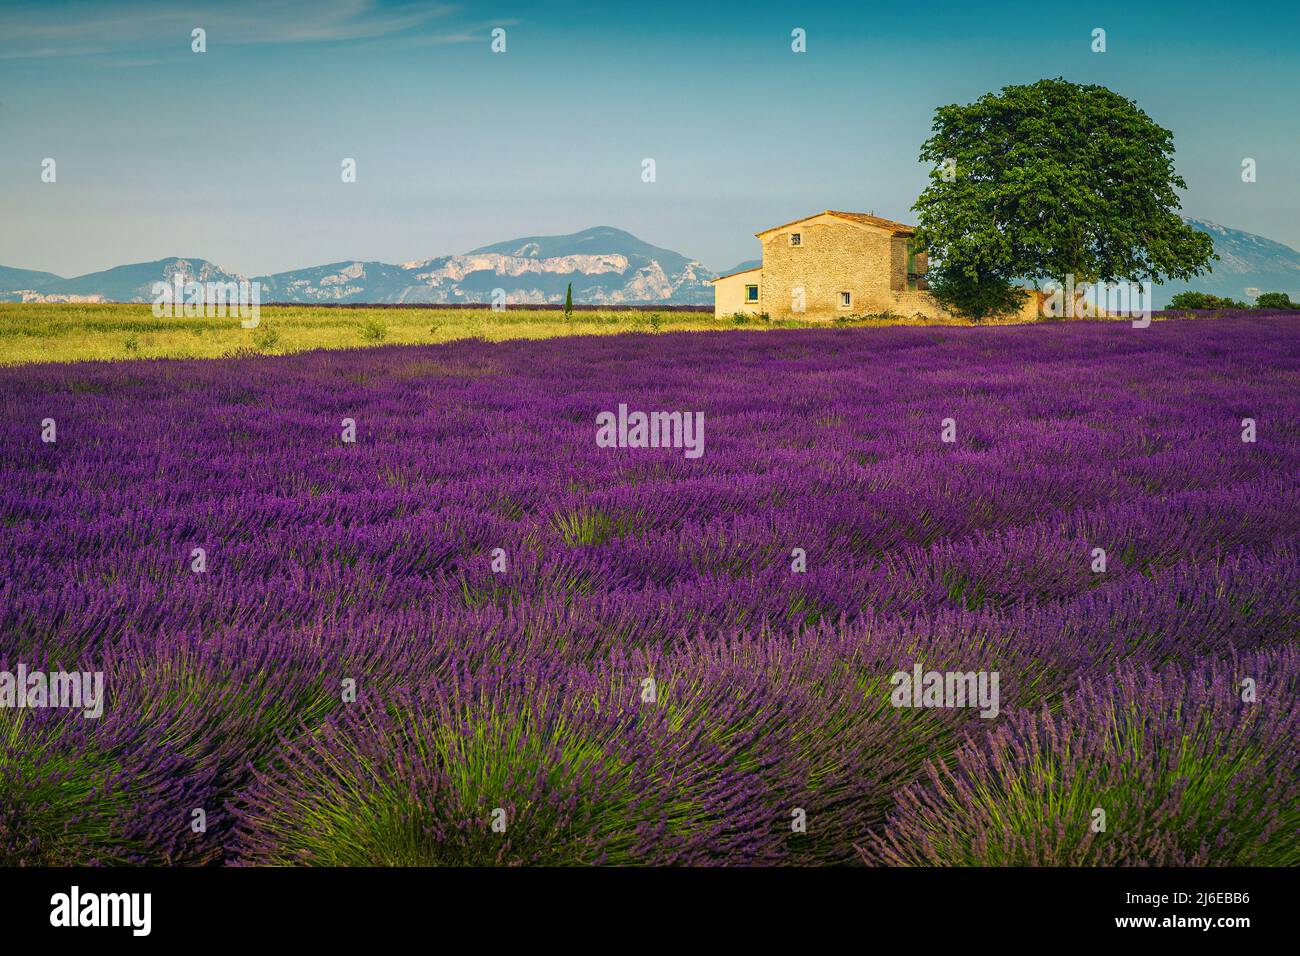 Stunning summer rural scenery and picturesque place, agricultural violet lavender fields and old rustic stone house near lavender plantation, Valensol Stock Photo